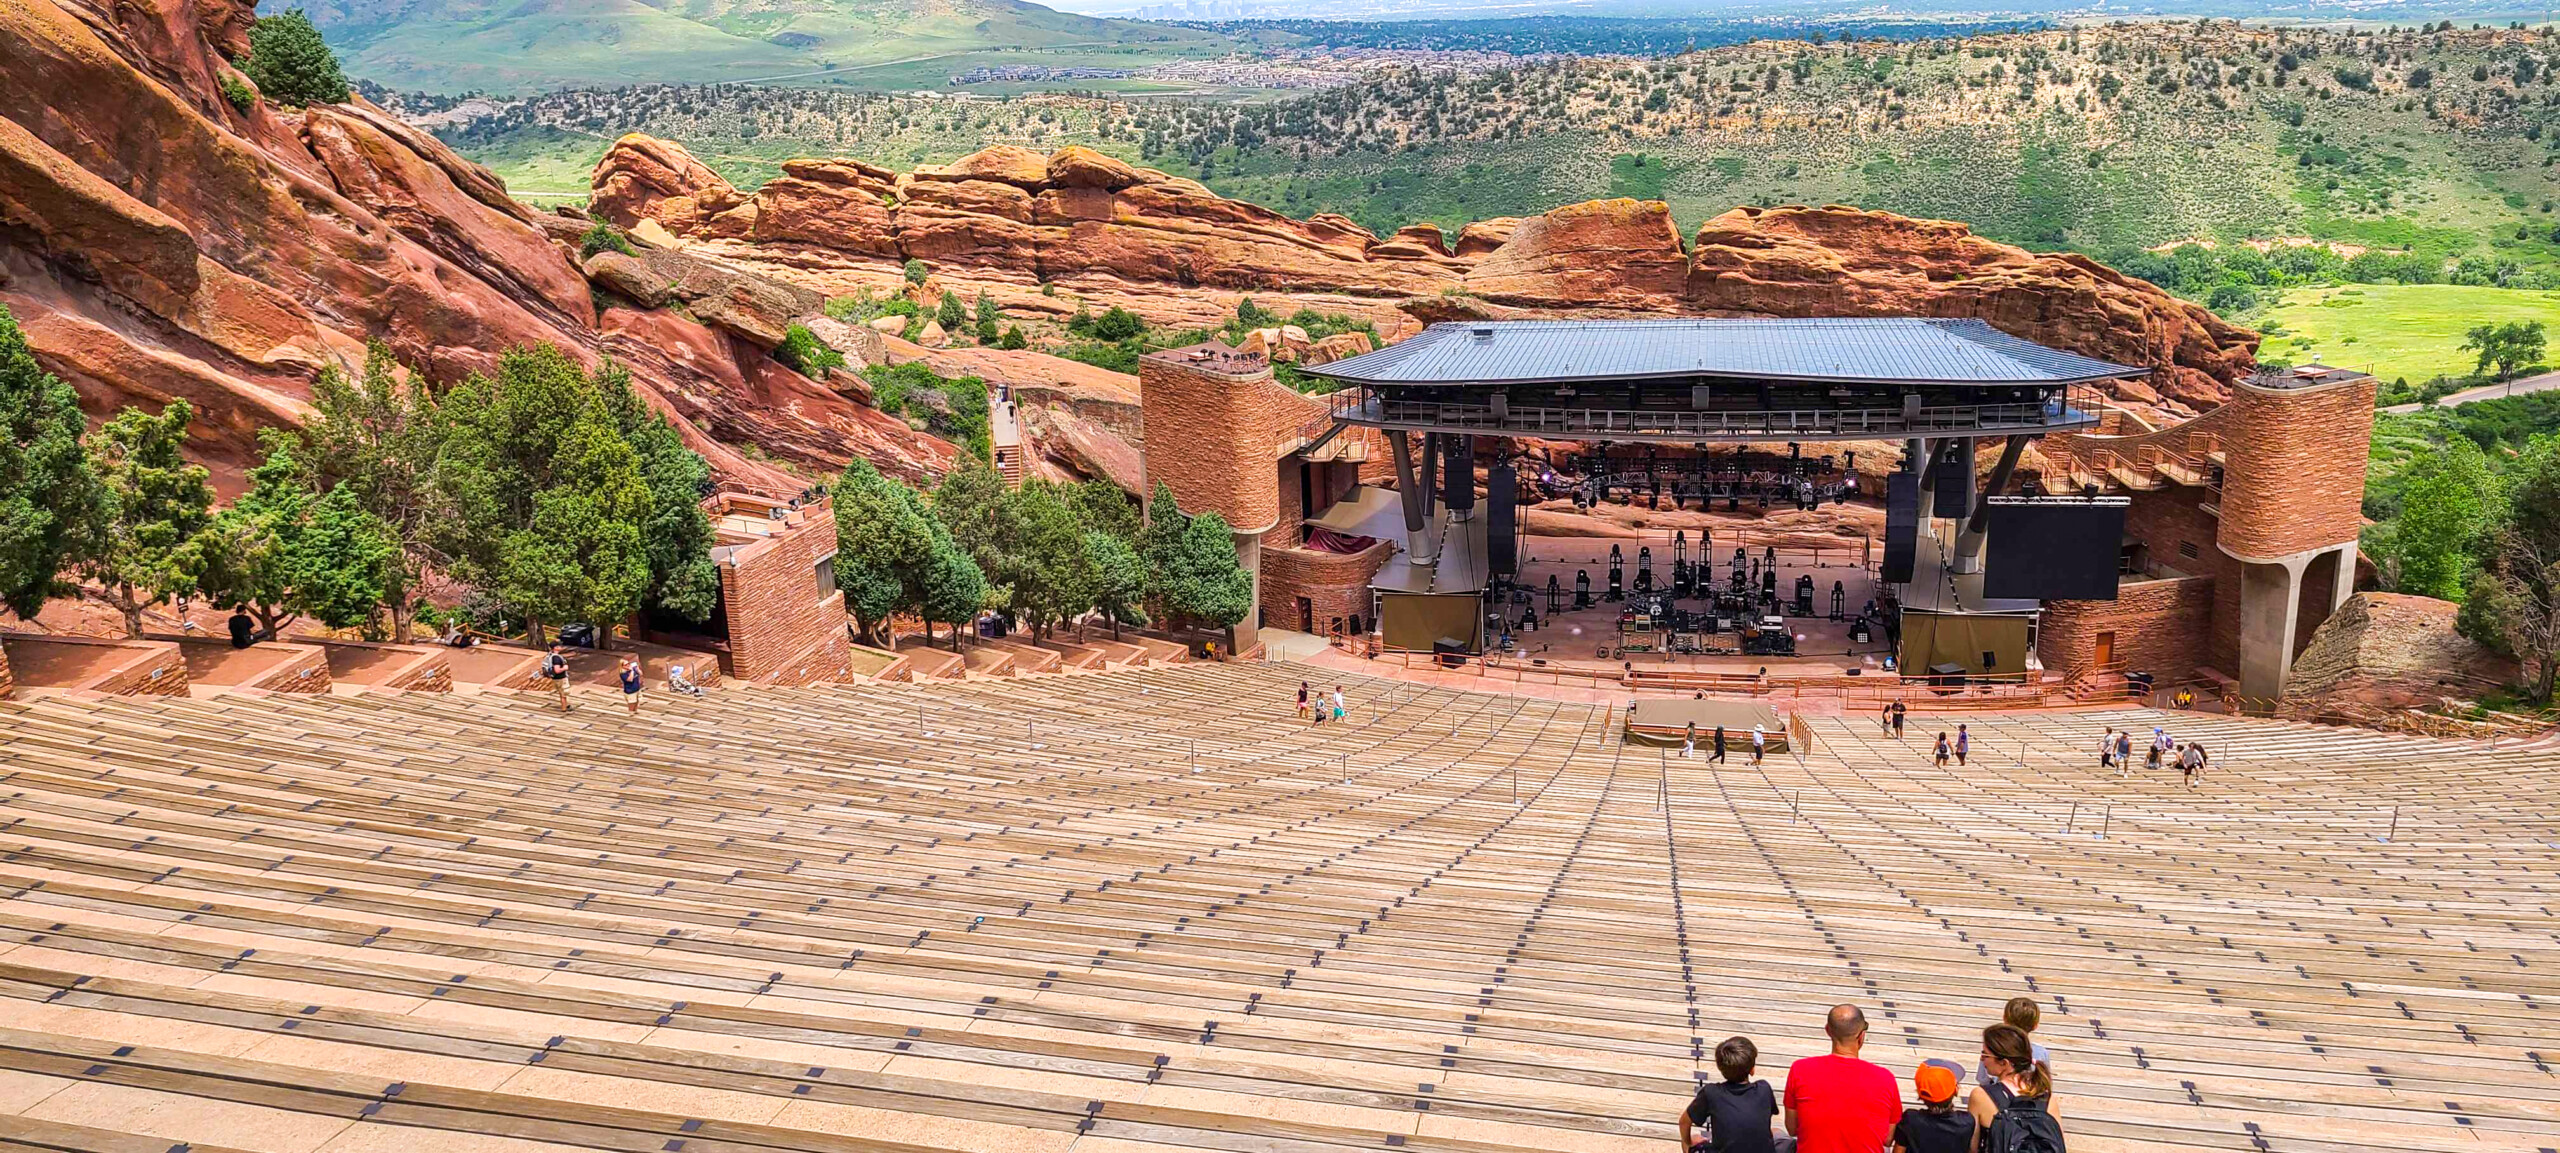 Looking down the steps of the Red Rocks Amphitheater